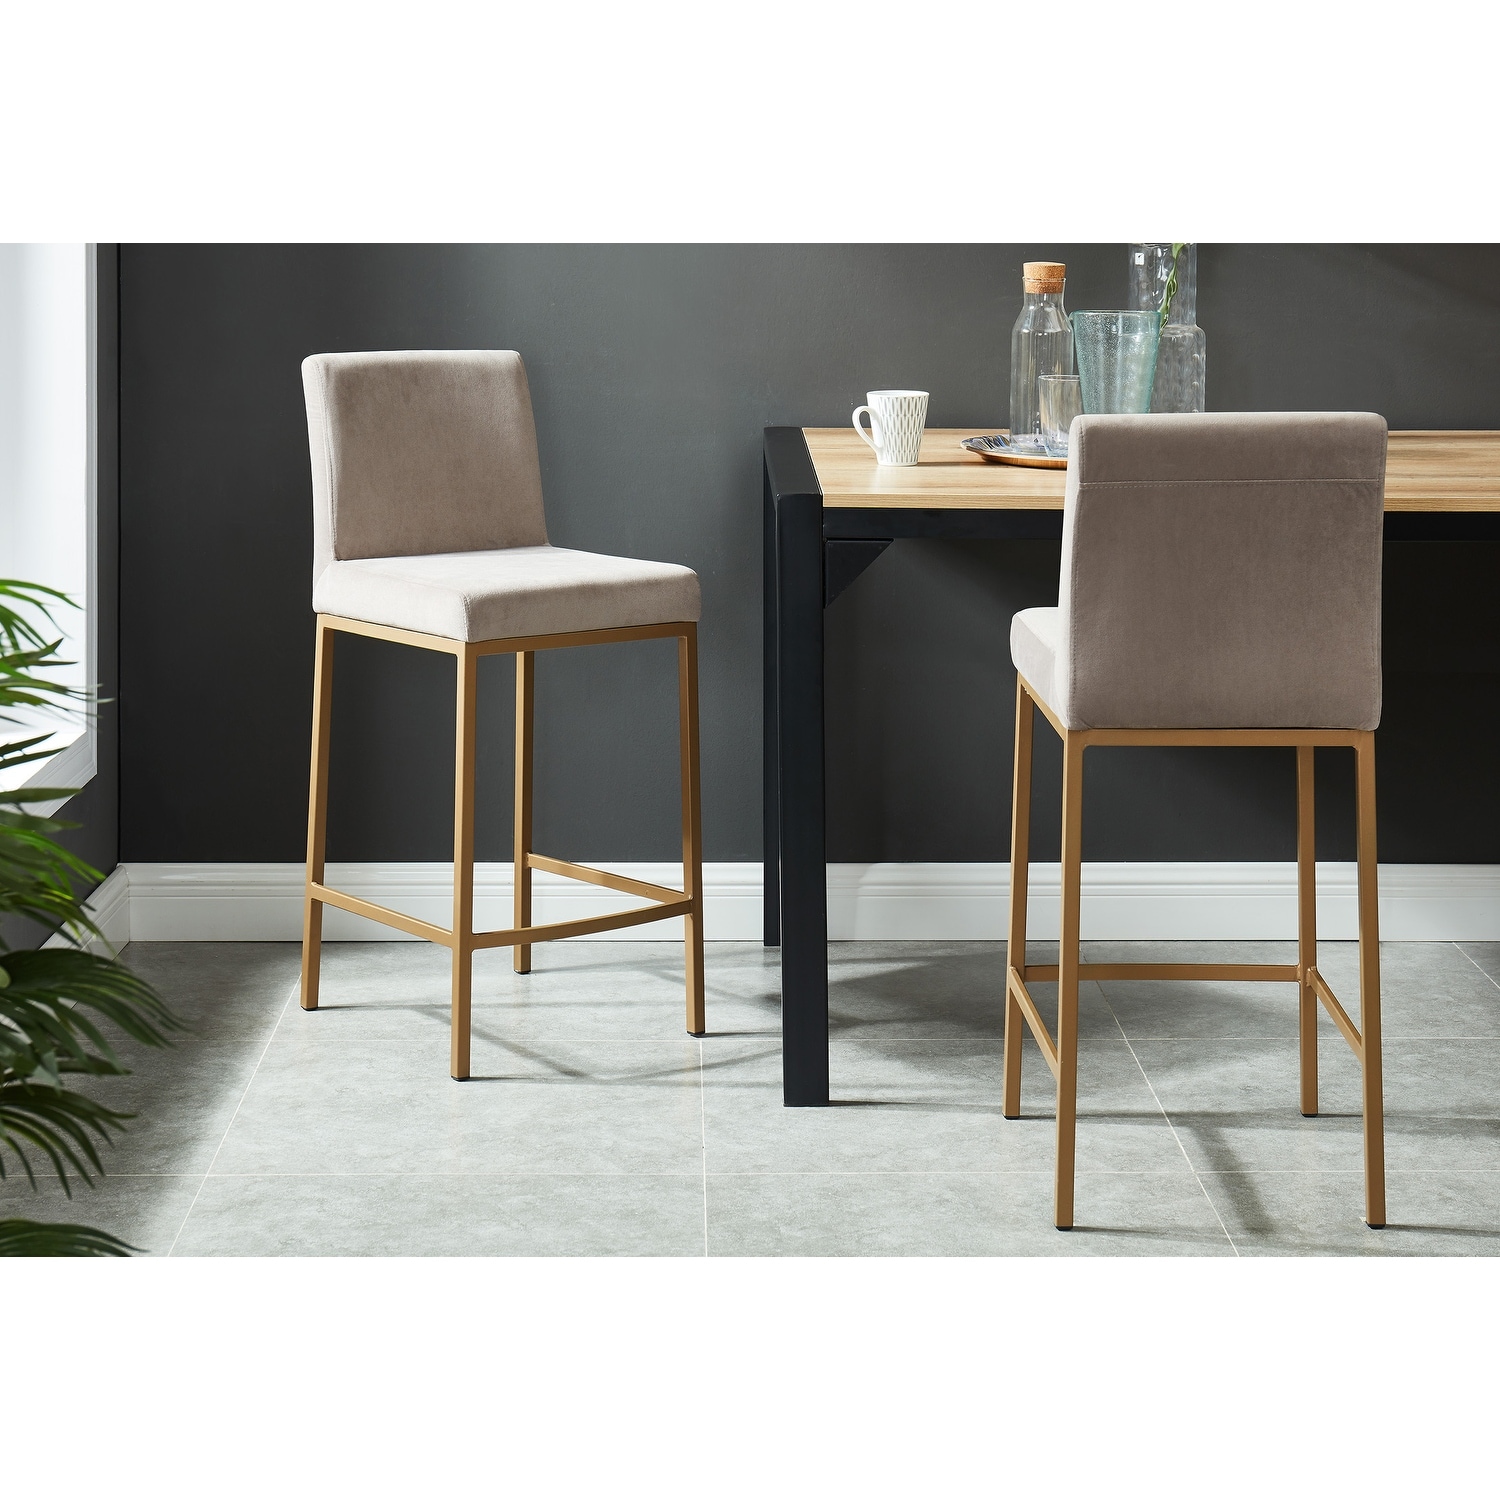 Set of 2 Bar Stools Adjustable Counter Chair Dining Desk Seat Velvet Wood Table 